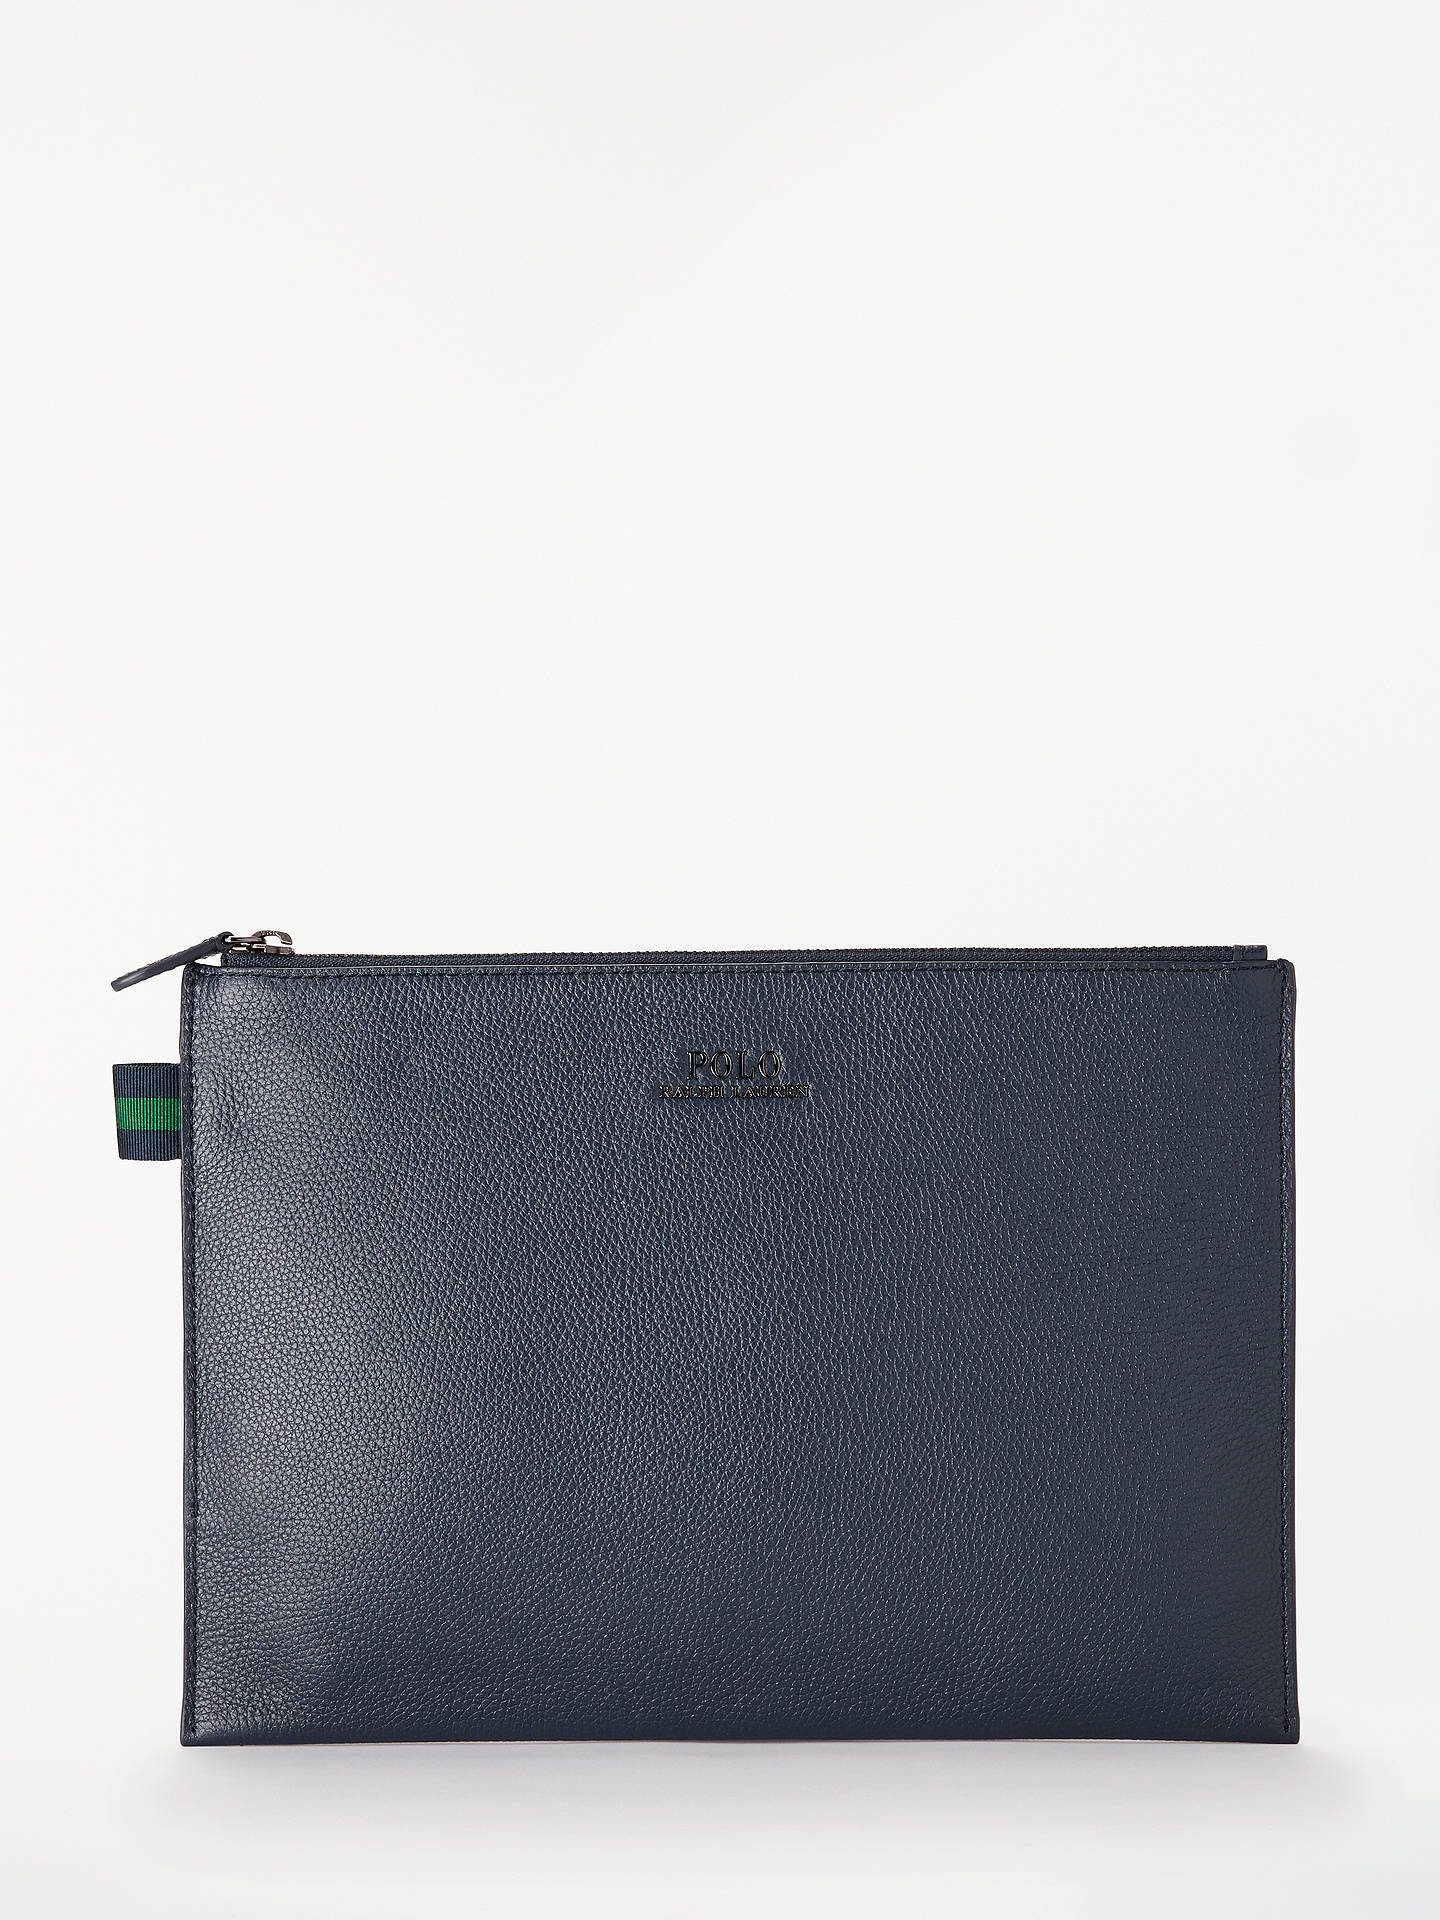 Polo Ralph Lauren Pebble Cow Leather Pouch, Navy at John Lewis & Partners